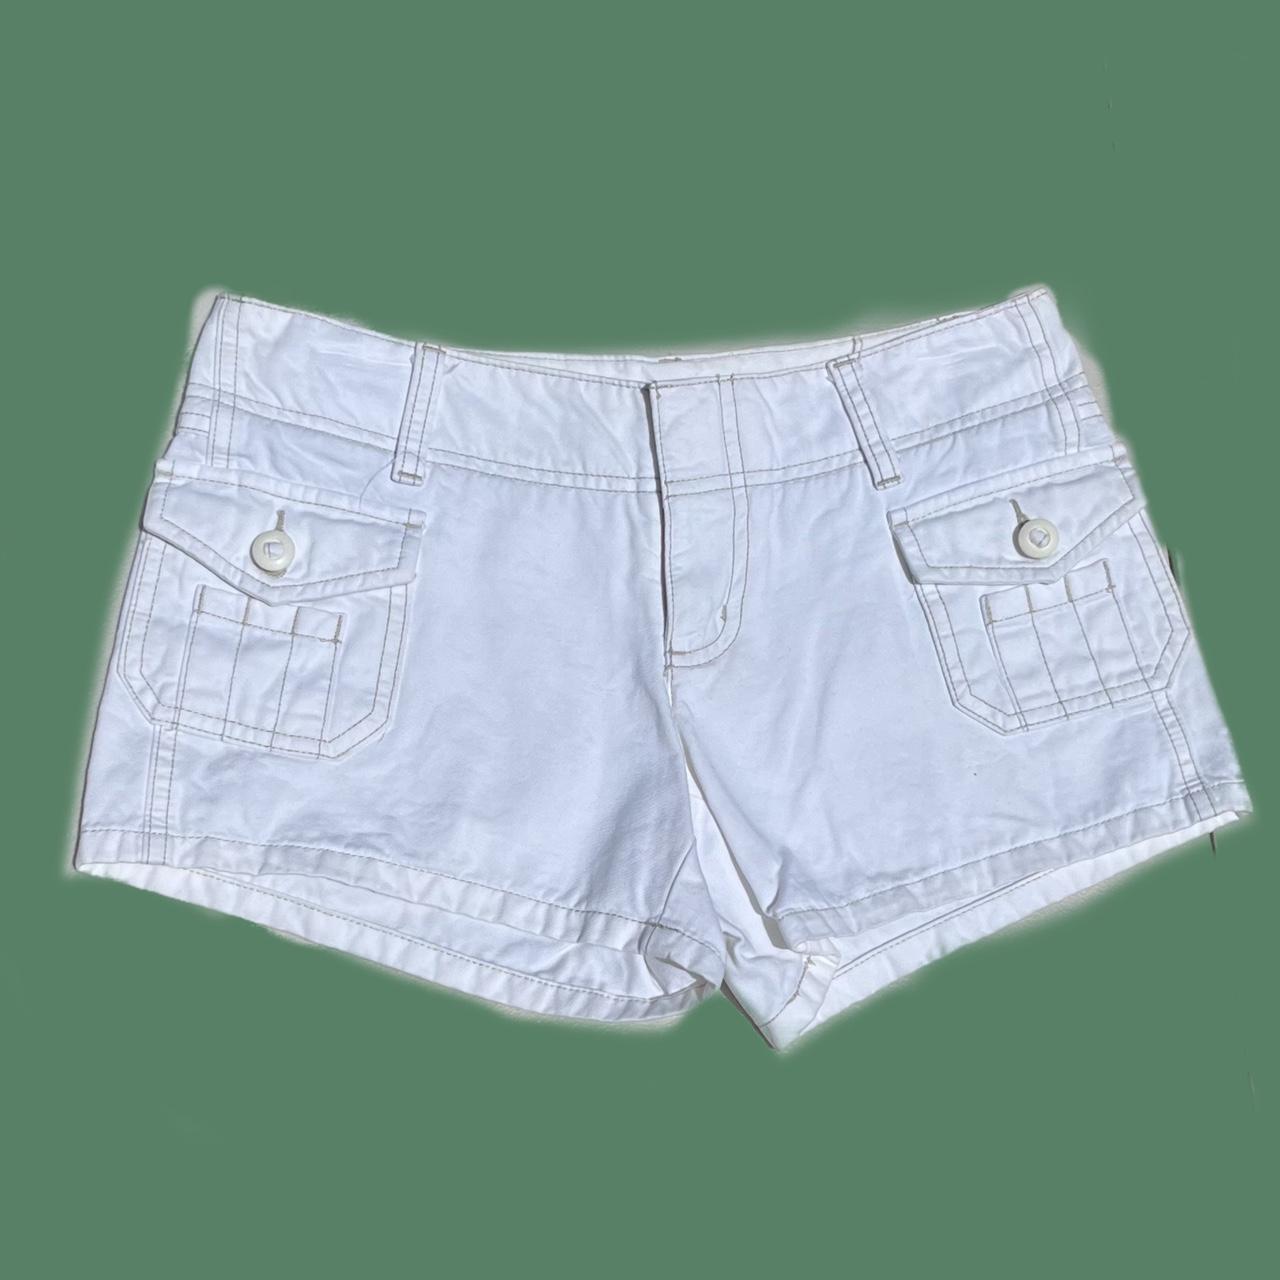 early 2000’s white low rise shorts very cheeky and... - Depop